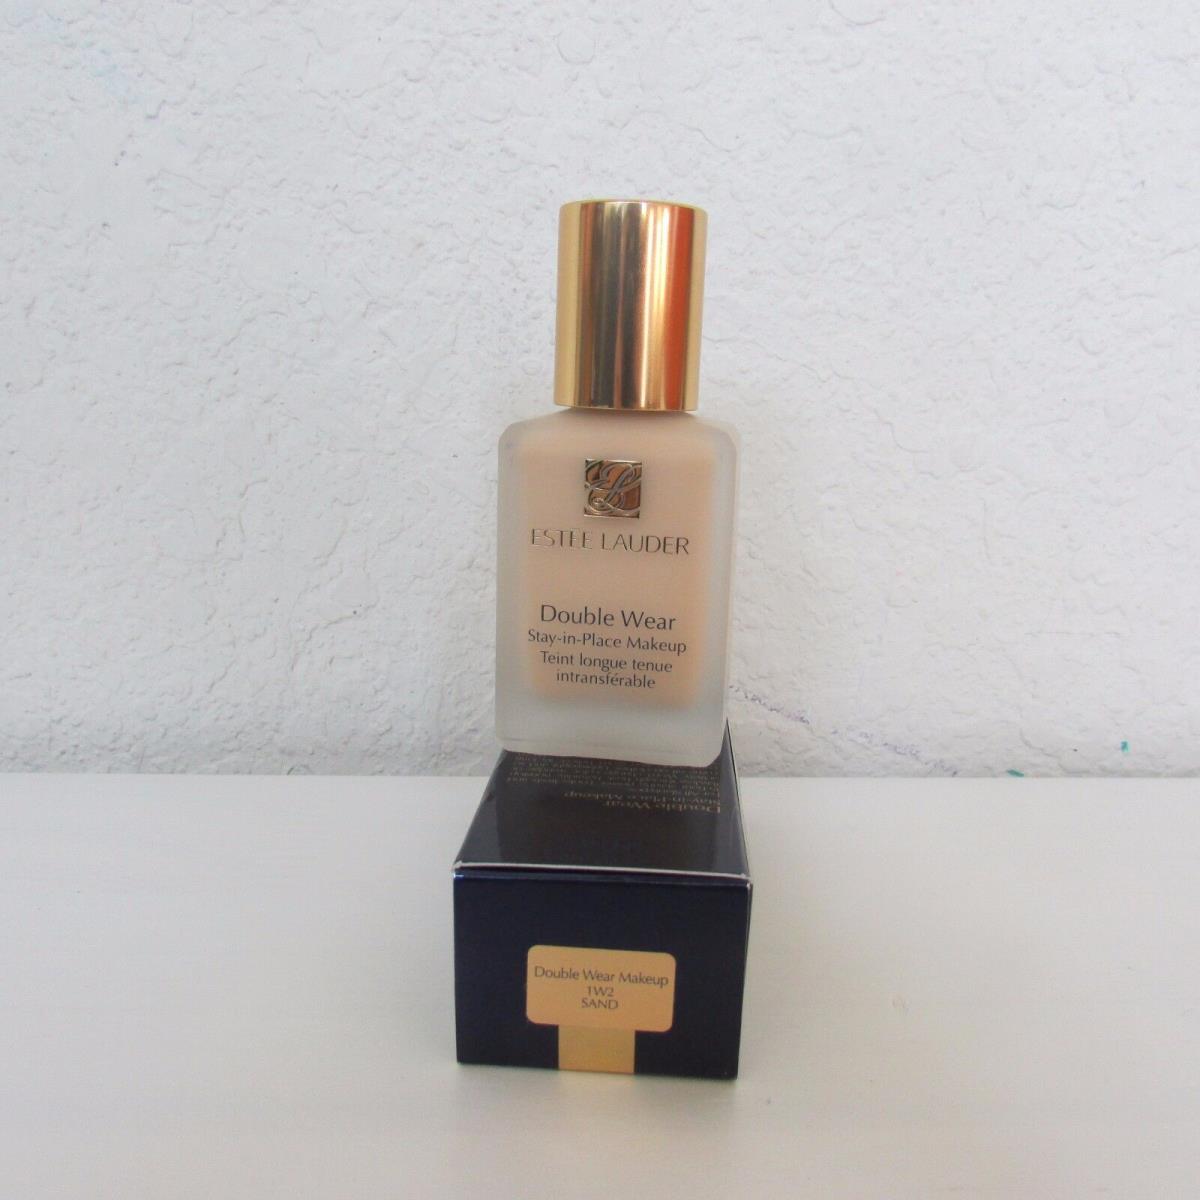 Estee Lauder Double Wear Stay-in-place Makeup Choose Your Shade 1.0 Oz/30 ml 1W2 Sand